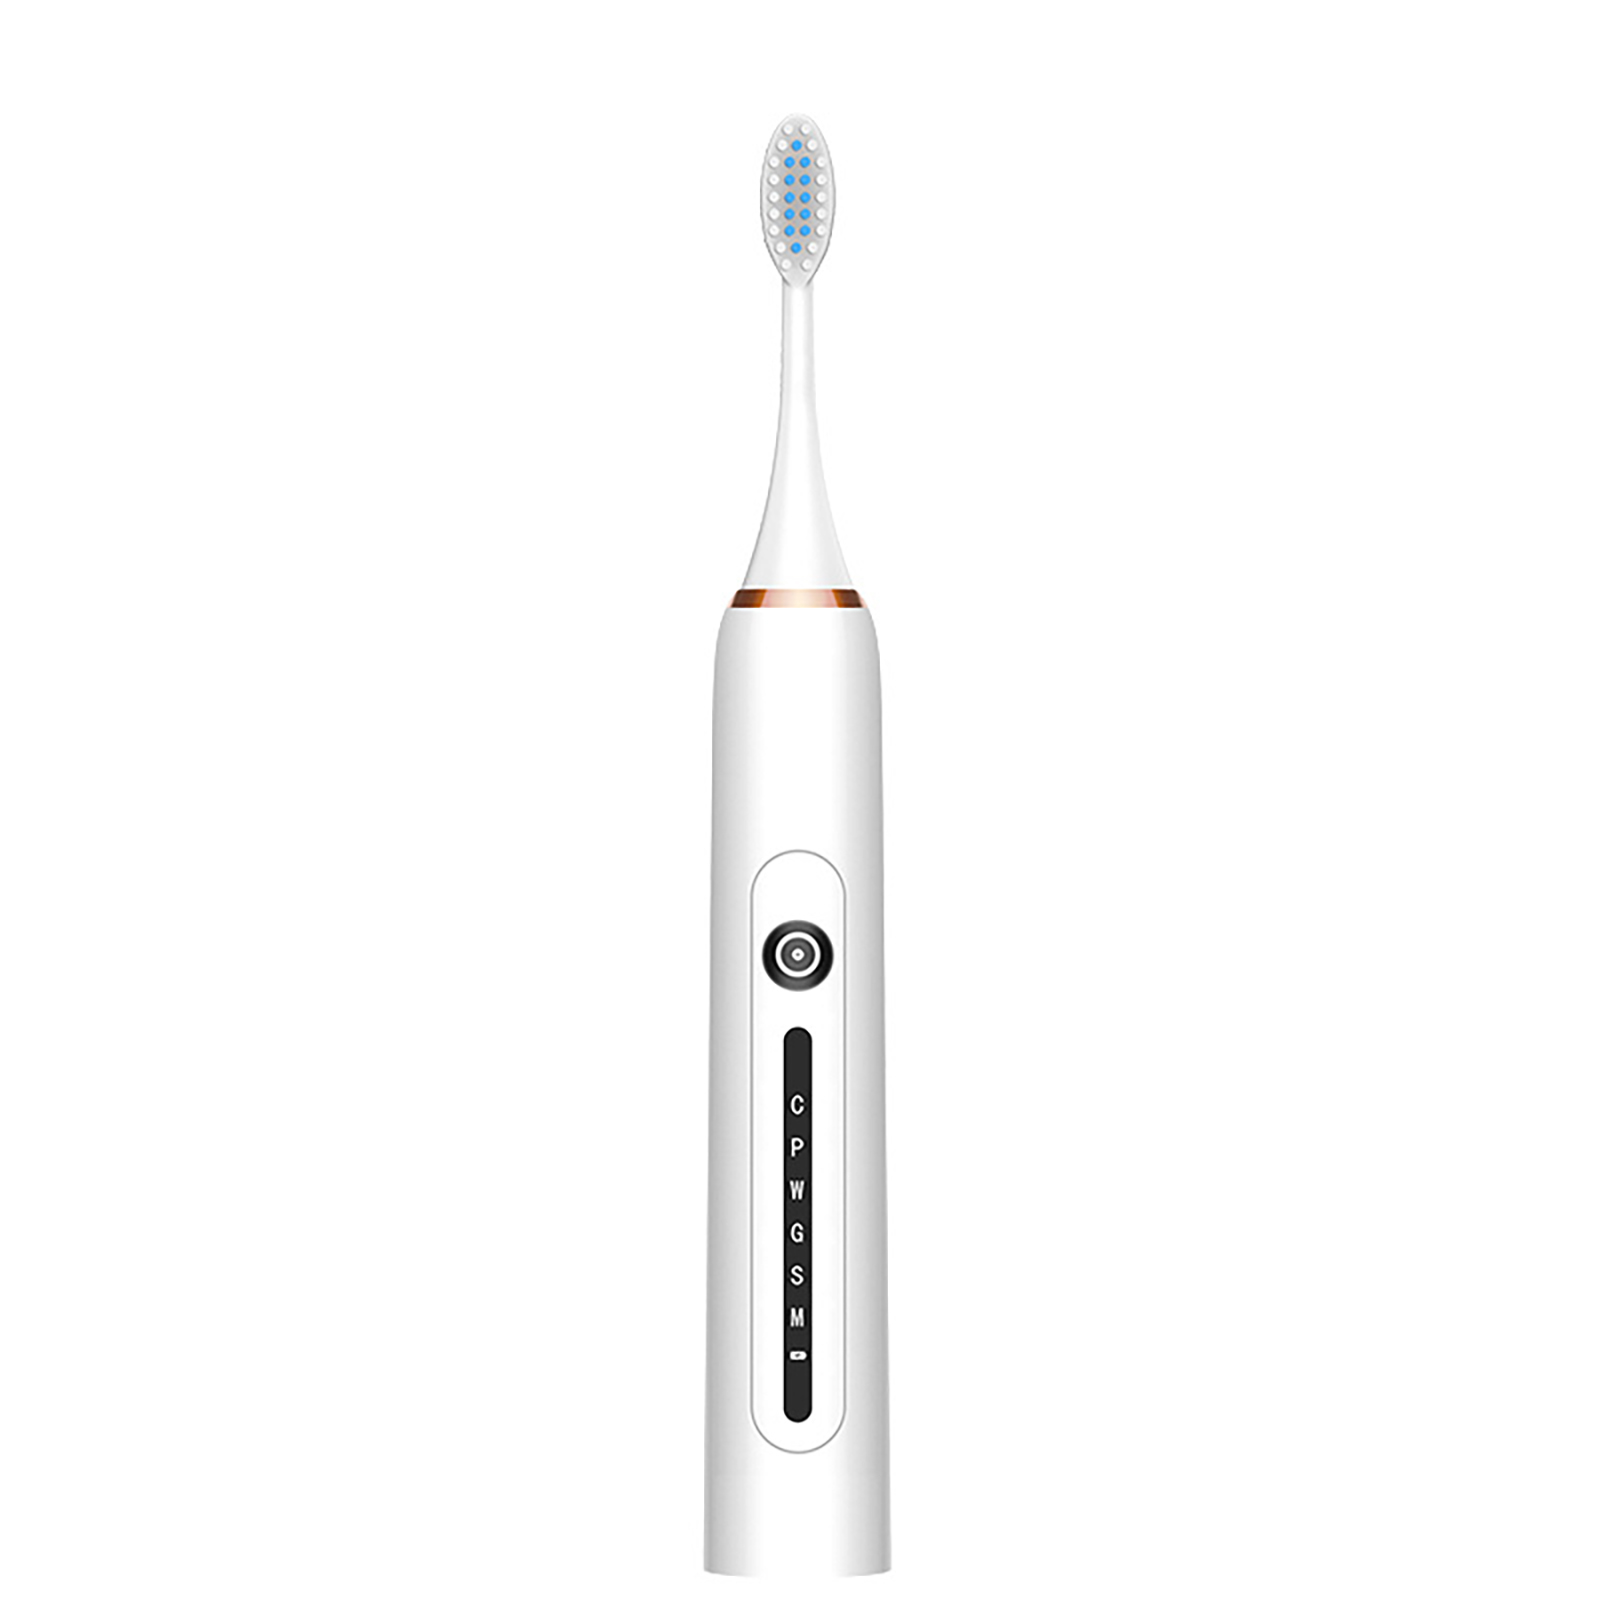 Sonic Electric Toothbrush Professional 6-speed Universal Waterproof Usb Rechargeable Tooth Brush Oral Care White